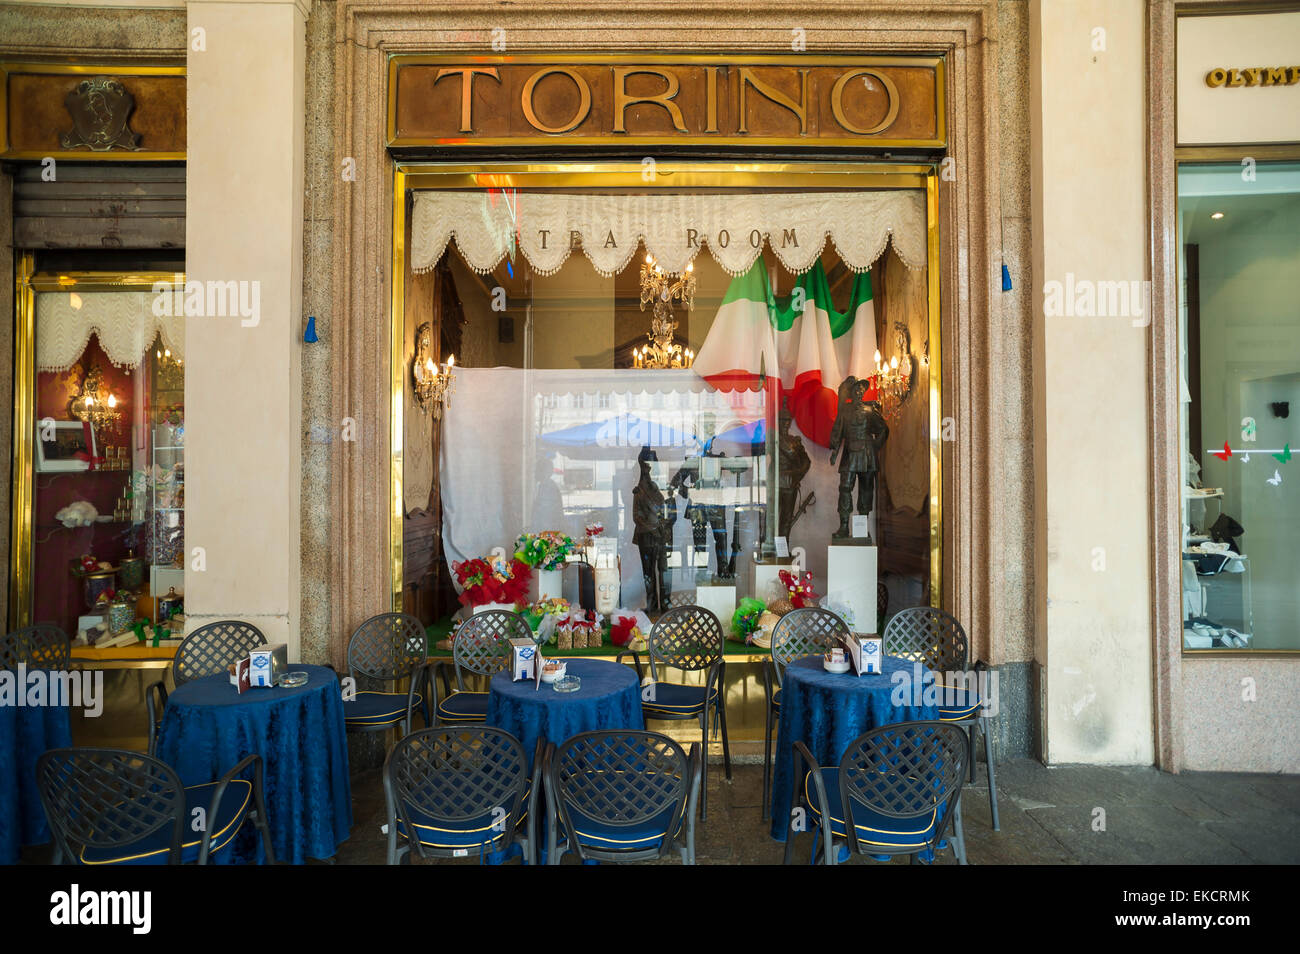 Caffe Torino, detail of the front of the Caffe Torino in the Piazza San Carlo in Turin, Italy. Stock Photo